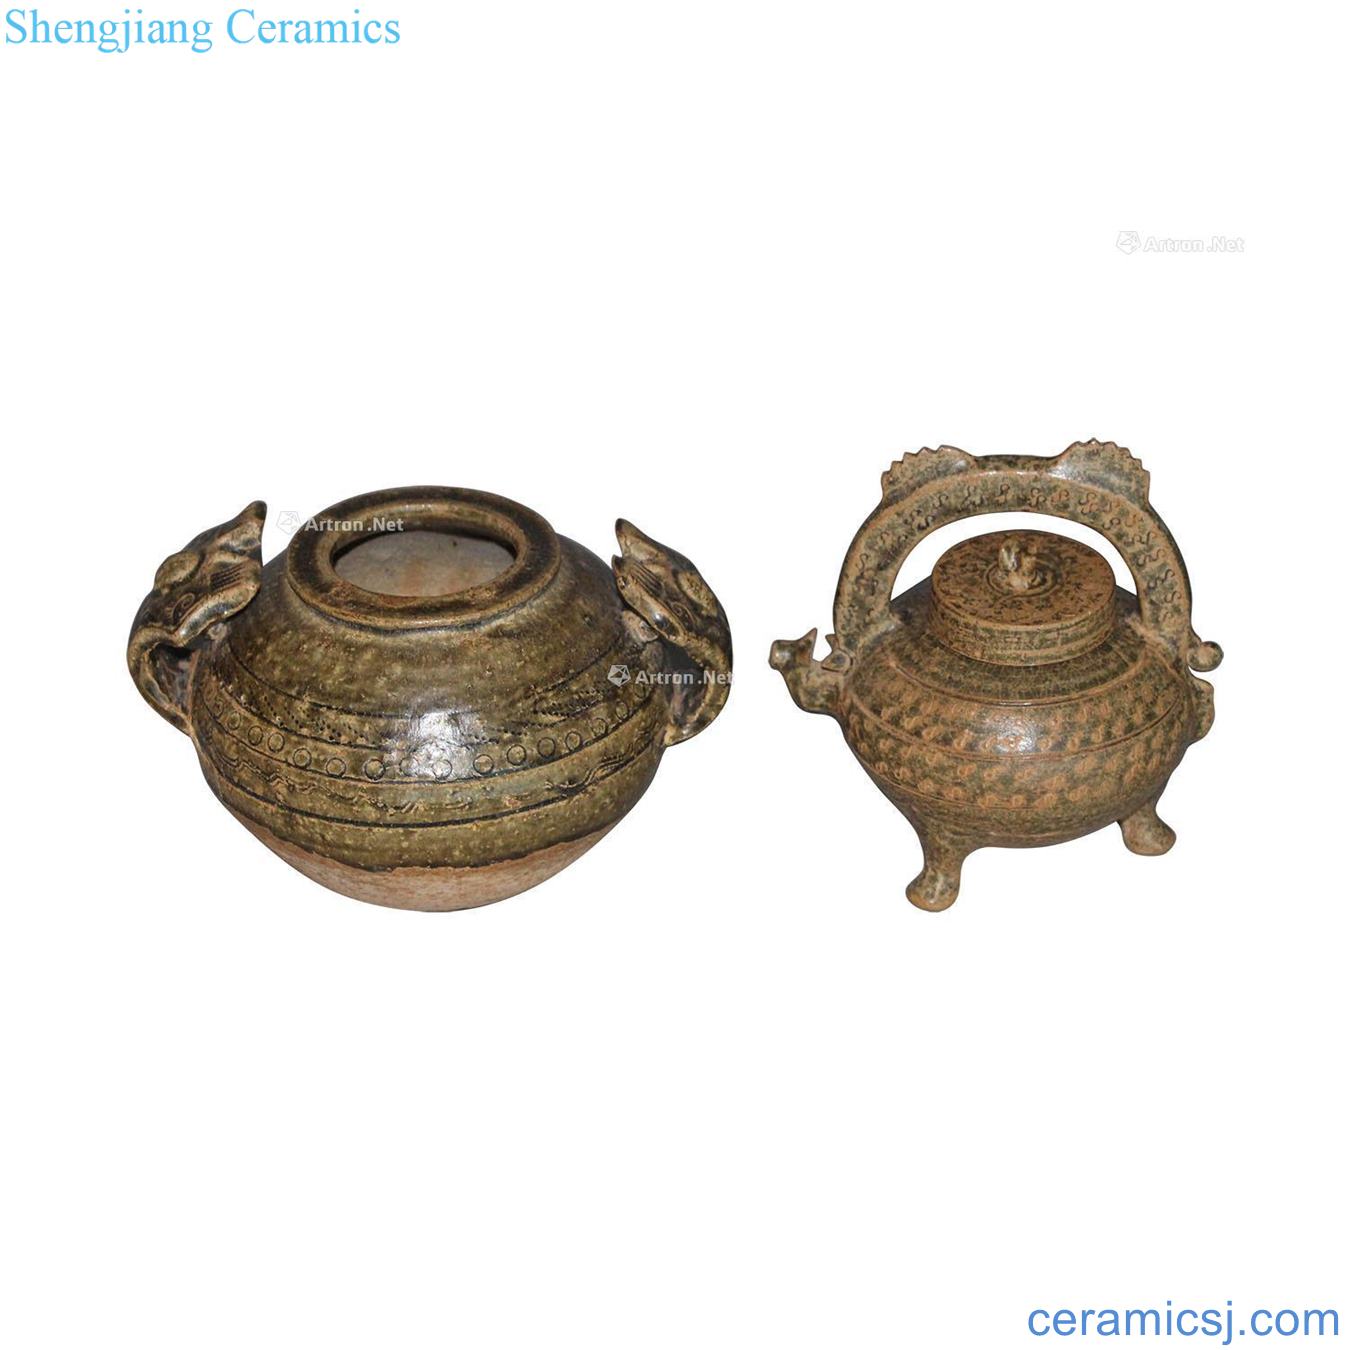 The song dynasty kiln porcelain (group a)